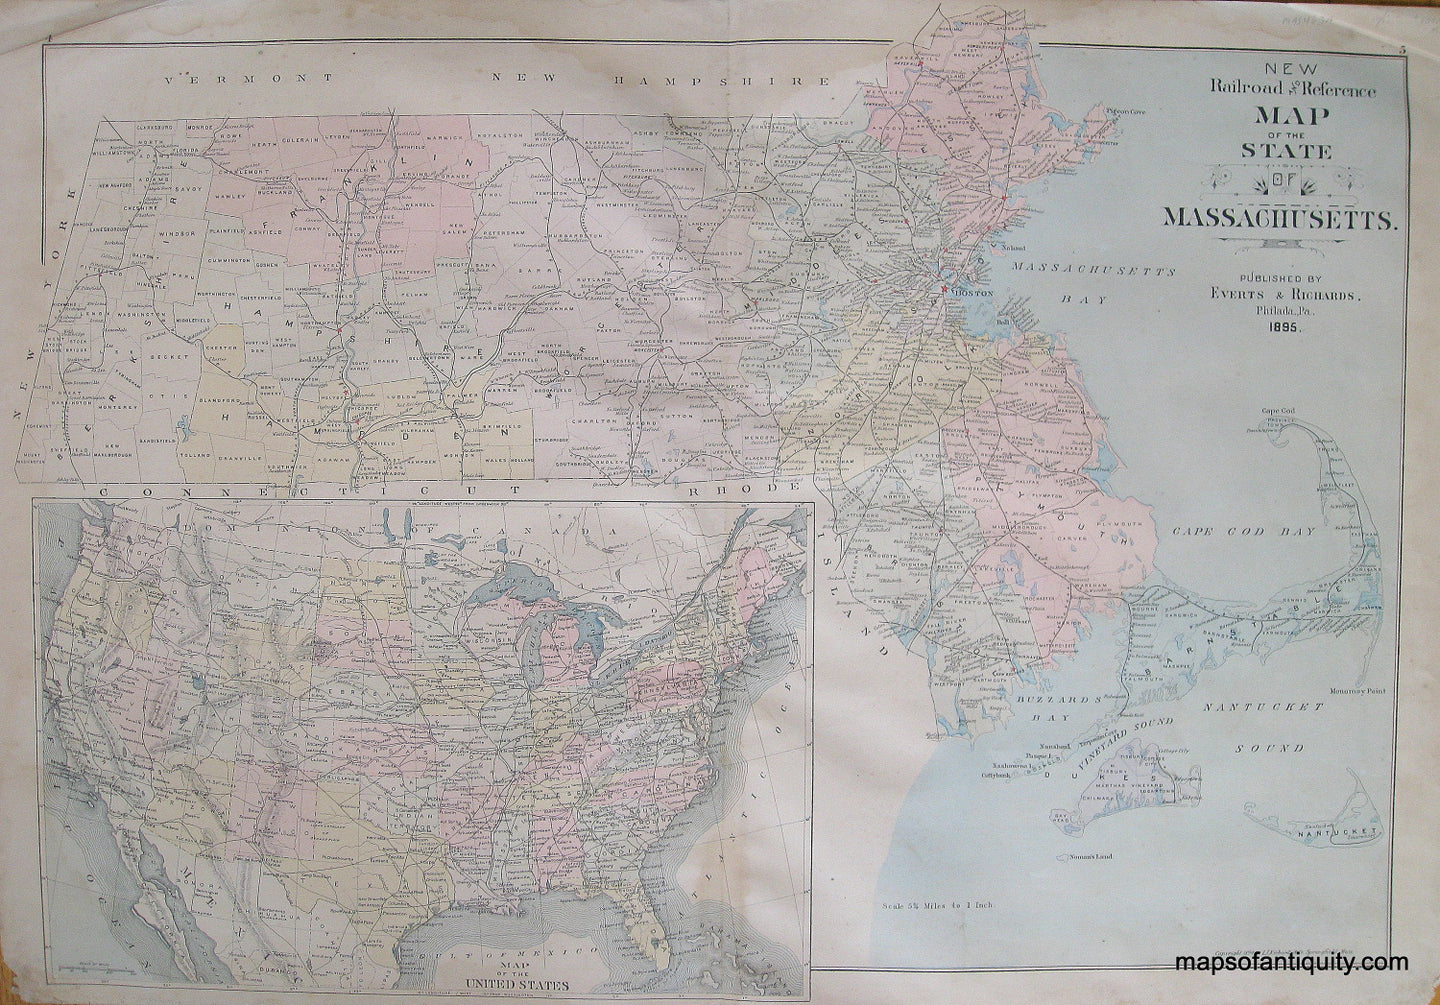 Antique-Hand-Colored-Map-State-of-Massachusetts-US-Massachusetts-Massachusetts-General-1895-Everts-&-Richards-Maps-Of-Antiquity